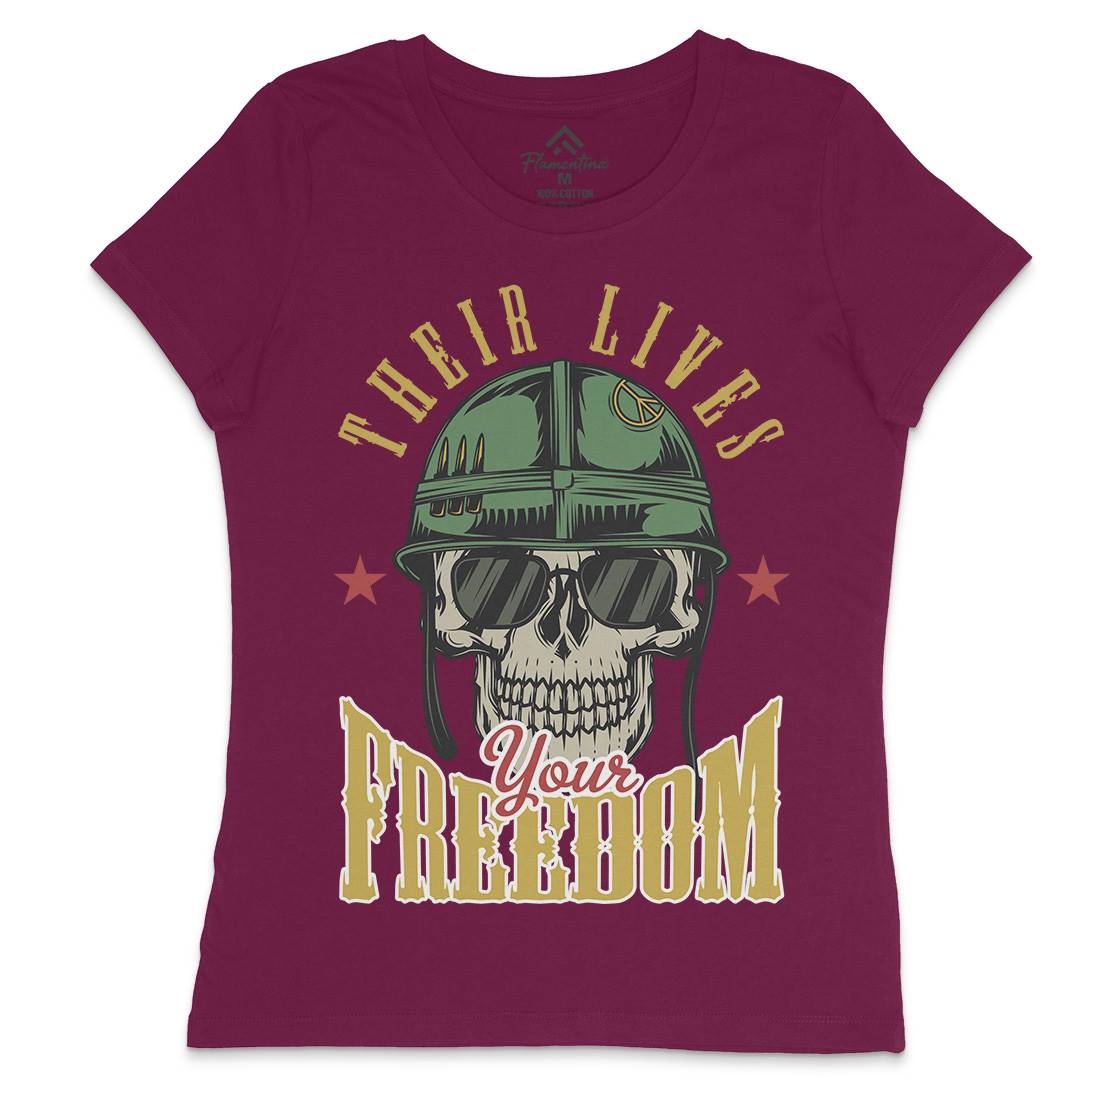 Your Freedom Womens Crew Neck T-Shirt Army C899